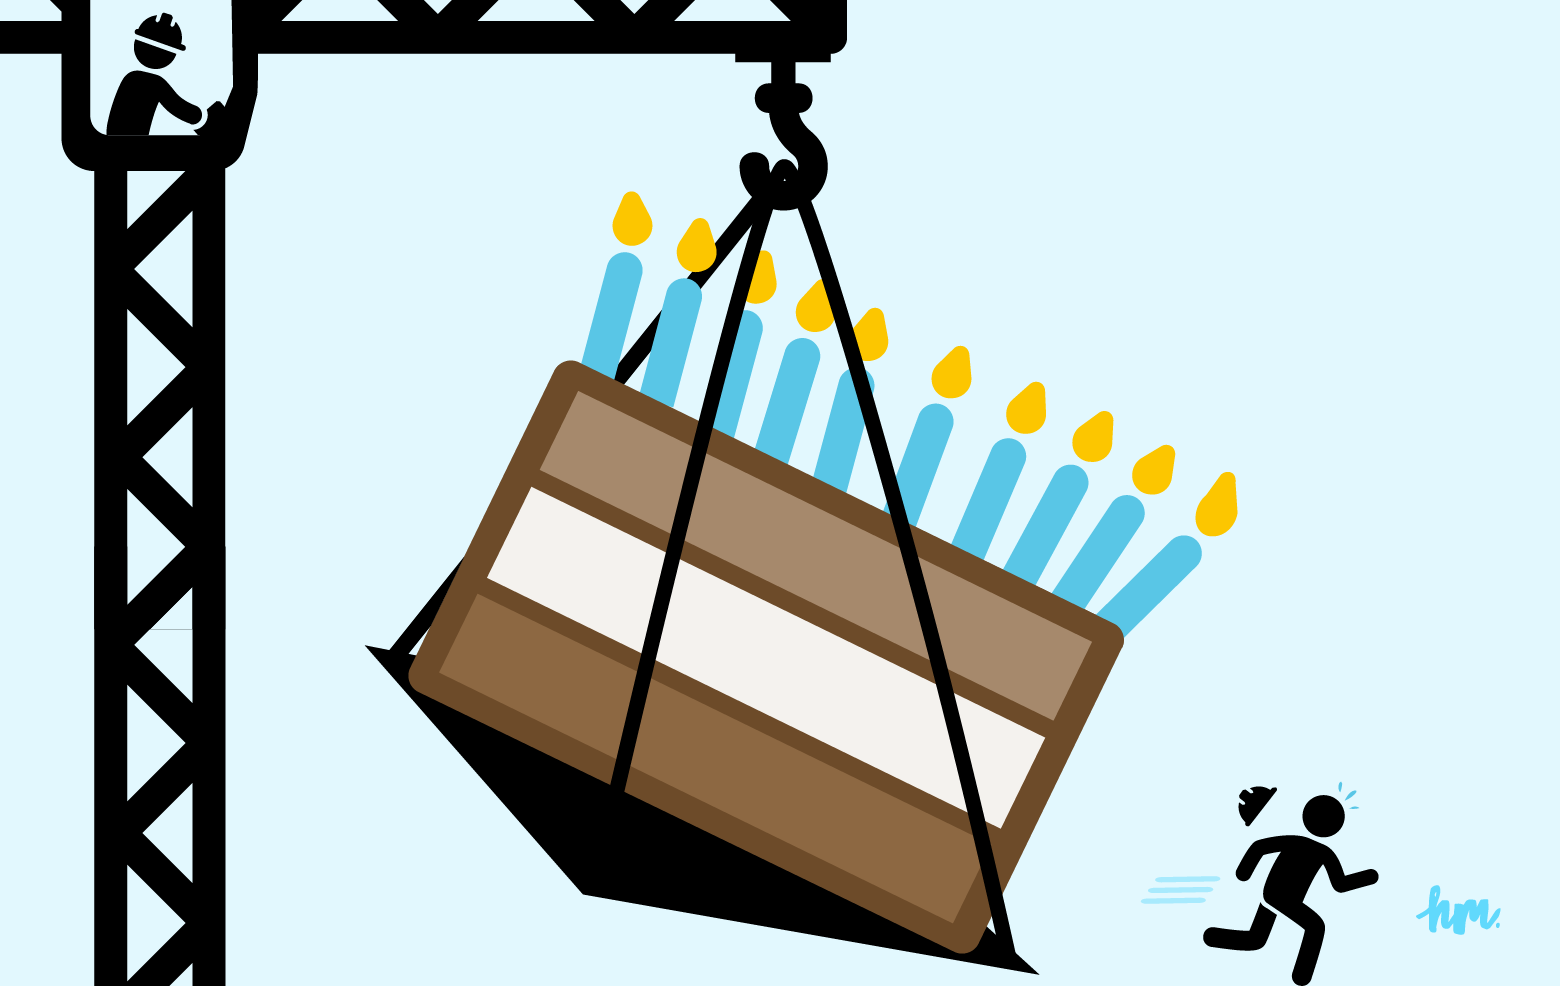 Illustration of an enormous birthday cake getting moved by a crane but it tilted to the right and it looks like it may fall at any moment.